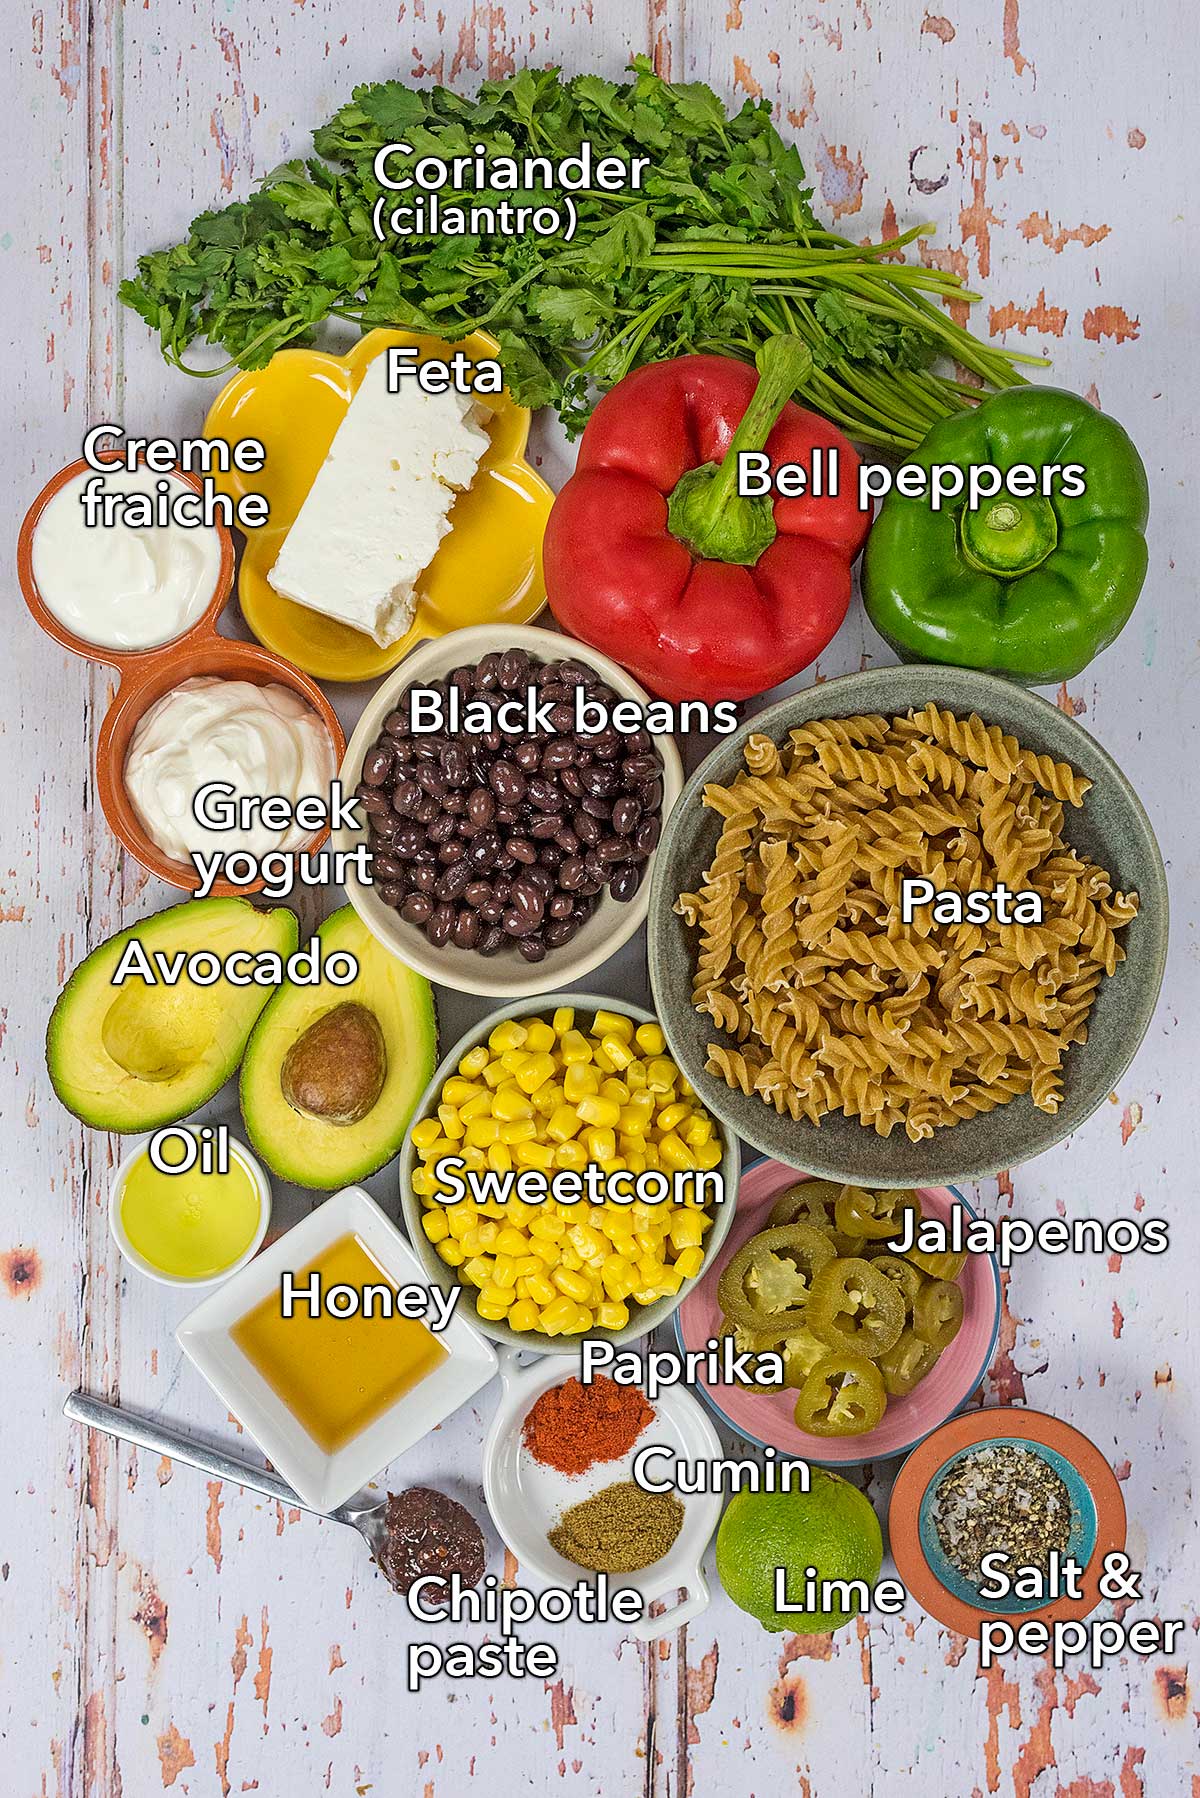 All the ingredients needed for this recipe laid out on a wooden surface with text overlay labels.